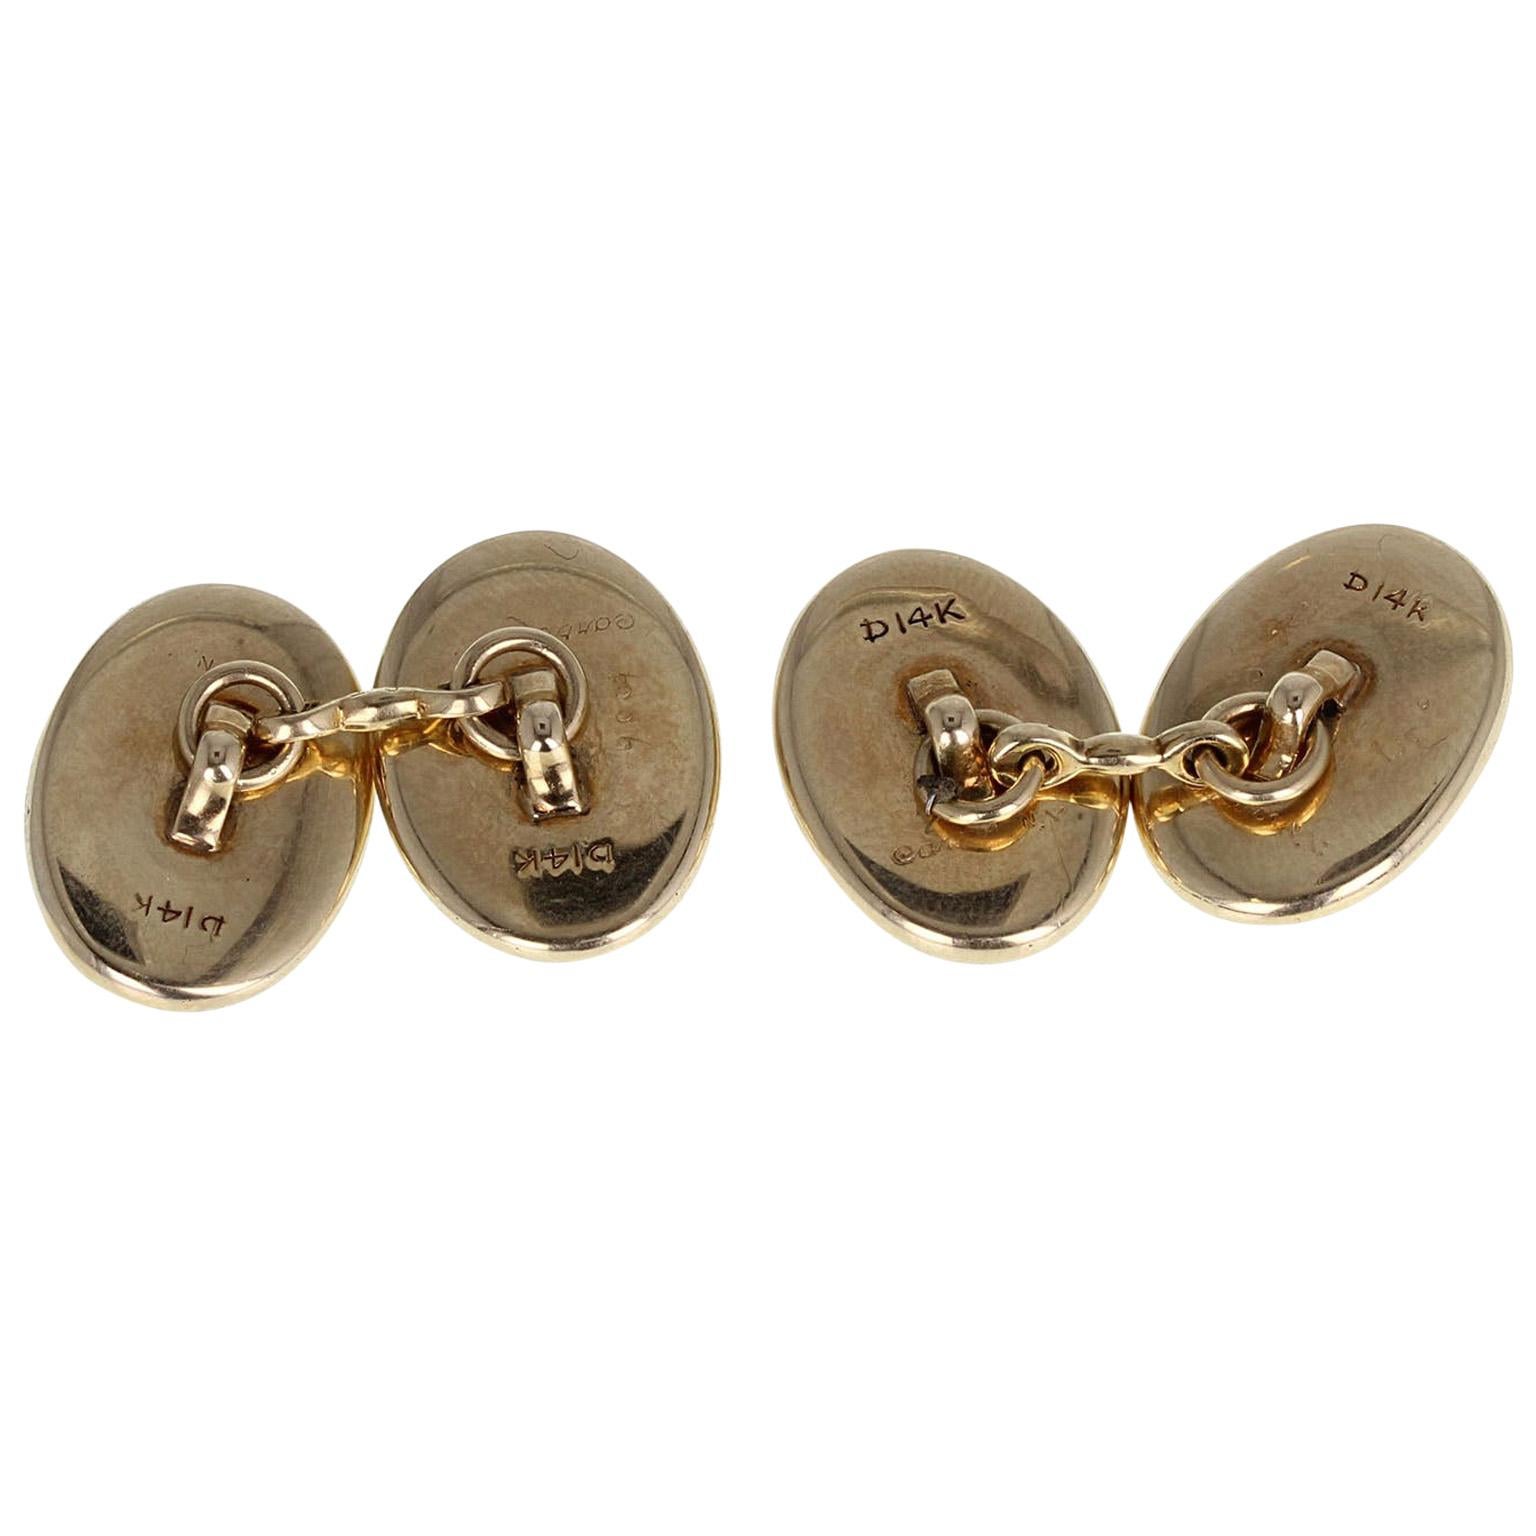  An exceptional pair of Essex crystal cufflinks from Cartier New York, complete with their original case. Each oval crystal depicting beautifully a detailed painting of a dog, set in an oval frame of 14-carat yellow gold. Joined together with 14-ct